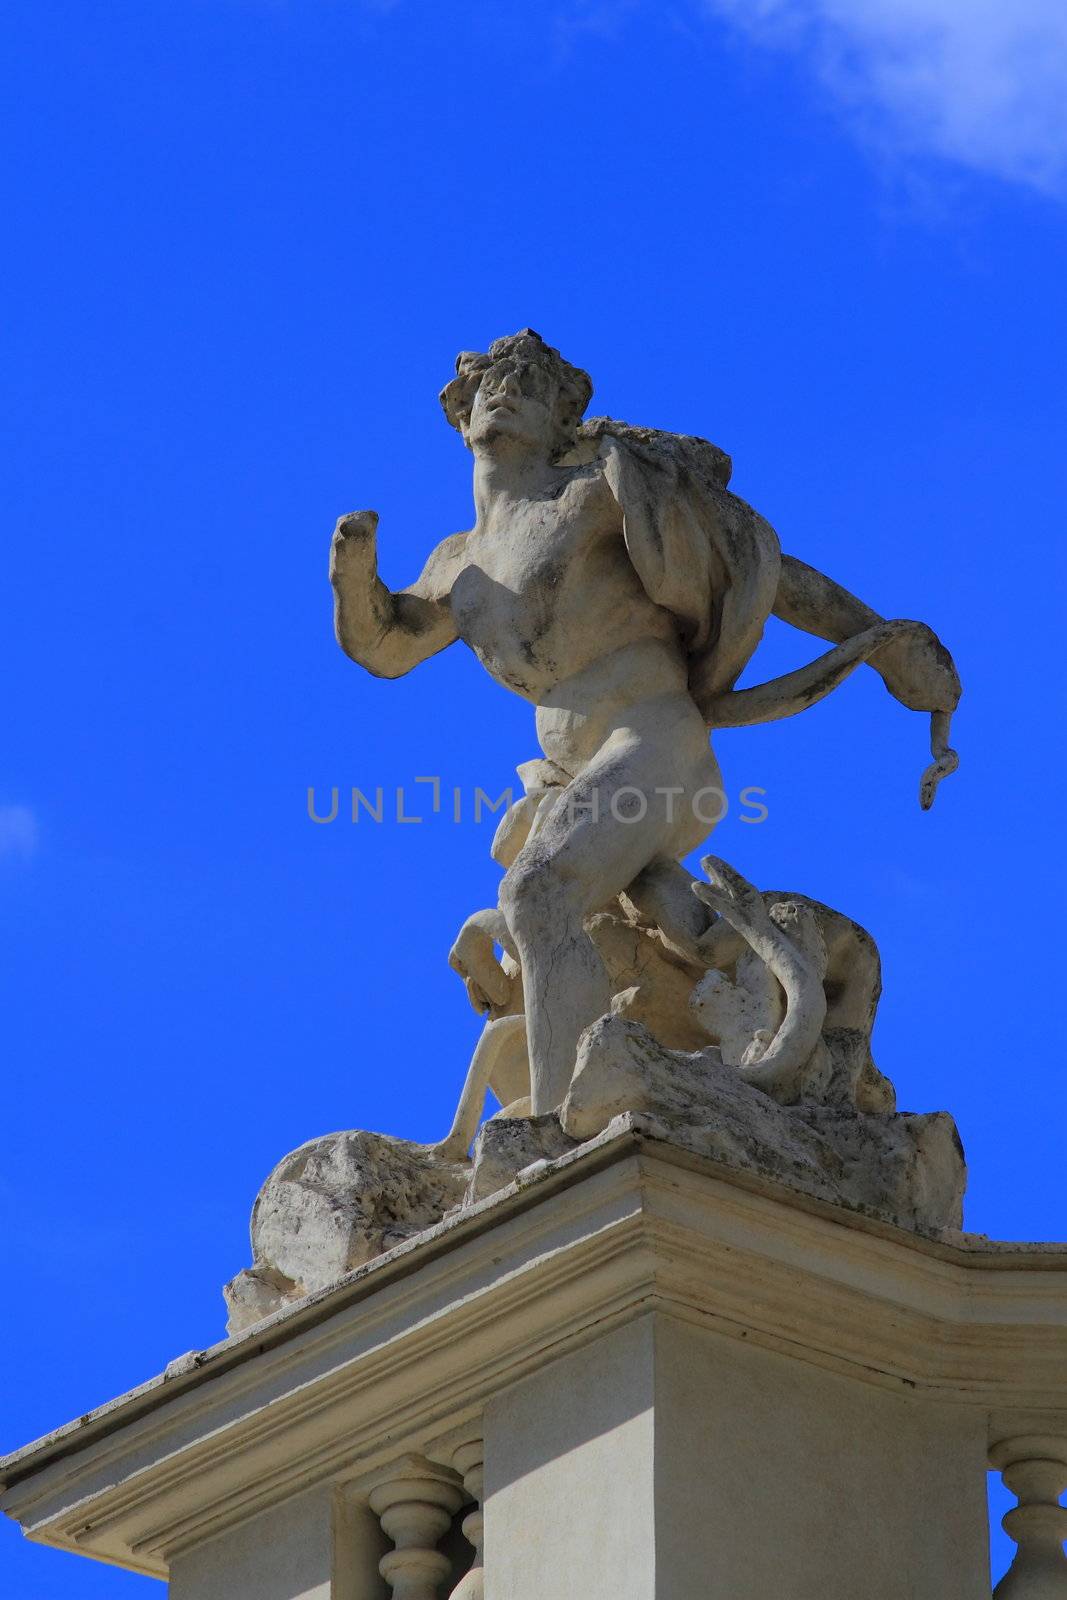 Statue of man with snake in Rome Italy, Villa Borghese